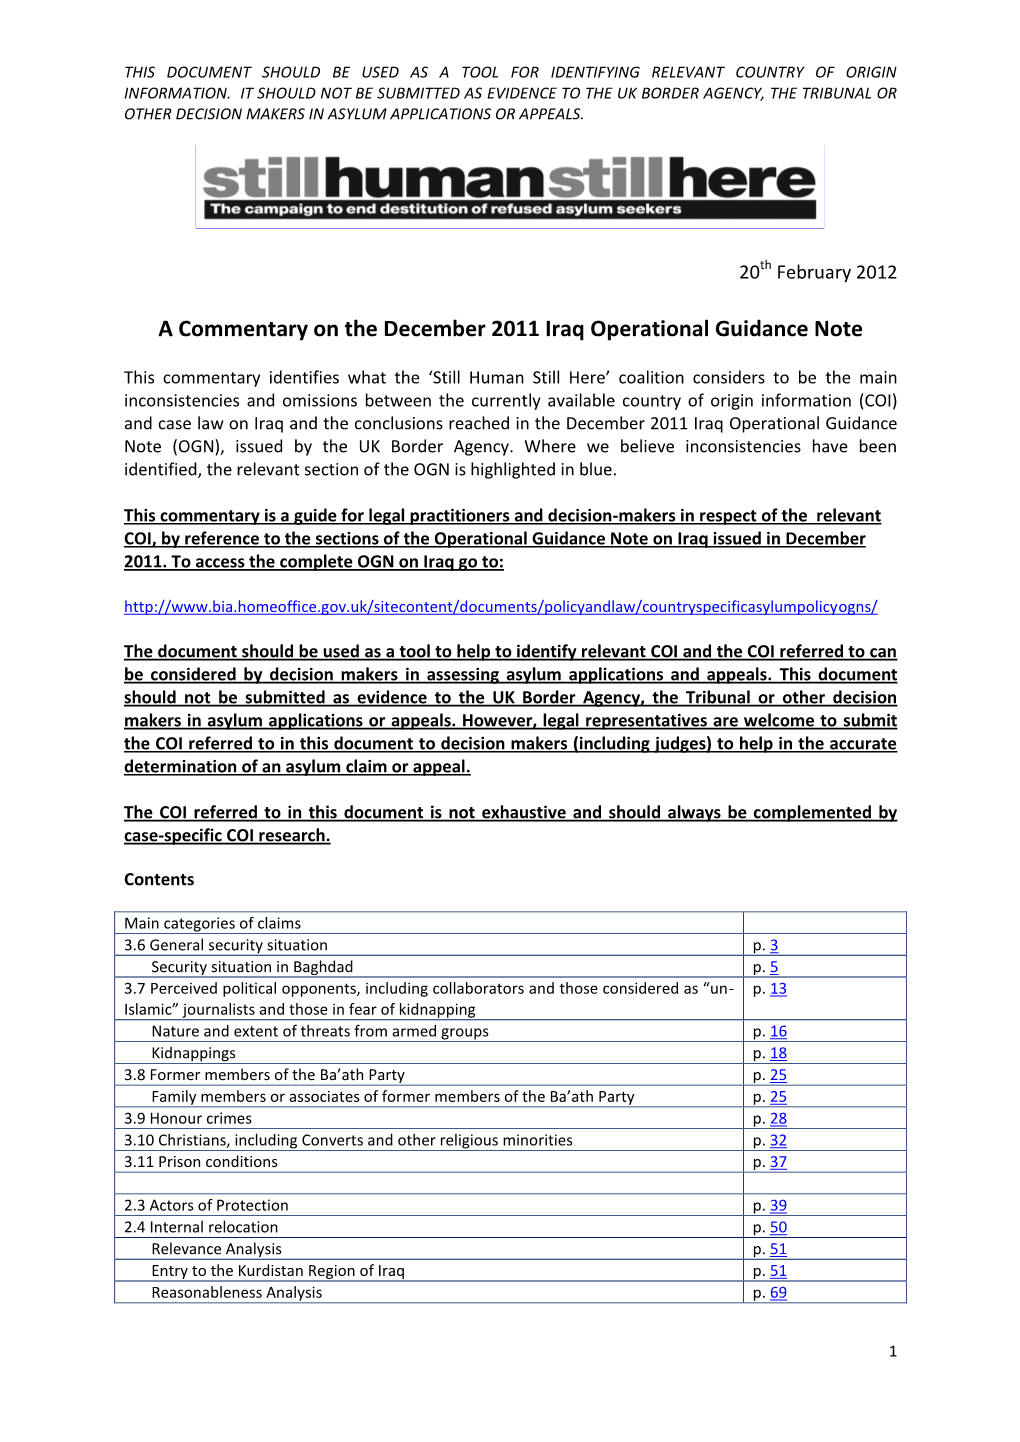 Commentary on the December 2011 UKBA's Operational Guidance